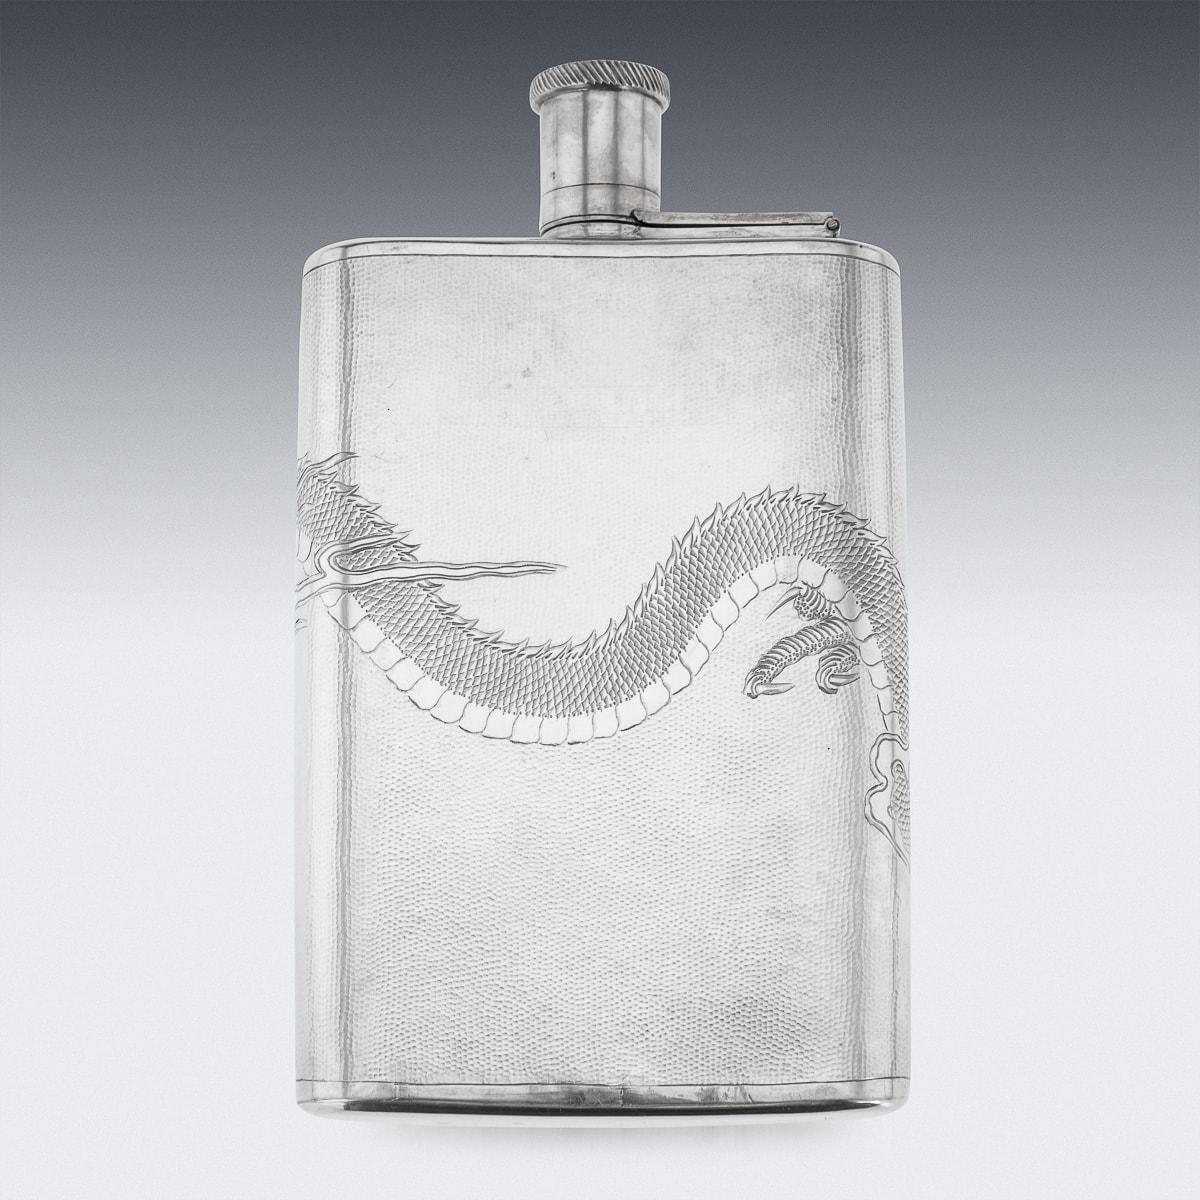 A stunning 20th Century Chinese export solid silver hip flask with silver hinged top. This flask has a textured hammered finish and engraved with a large dragon chasing the pearl of wisfon. Hallmarked 'Silver' (900 standard).

CONDITION
In Great